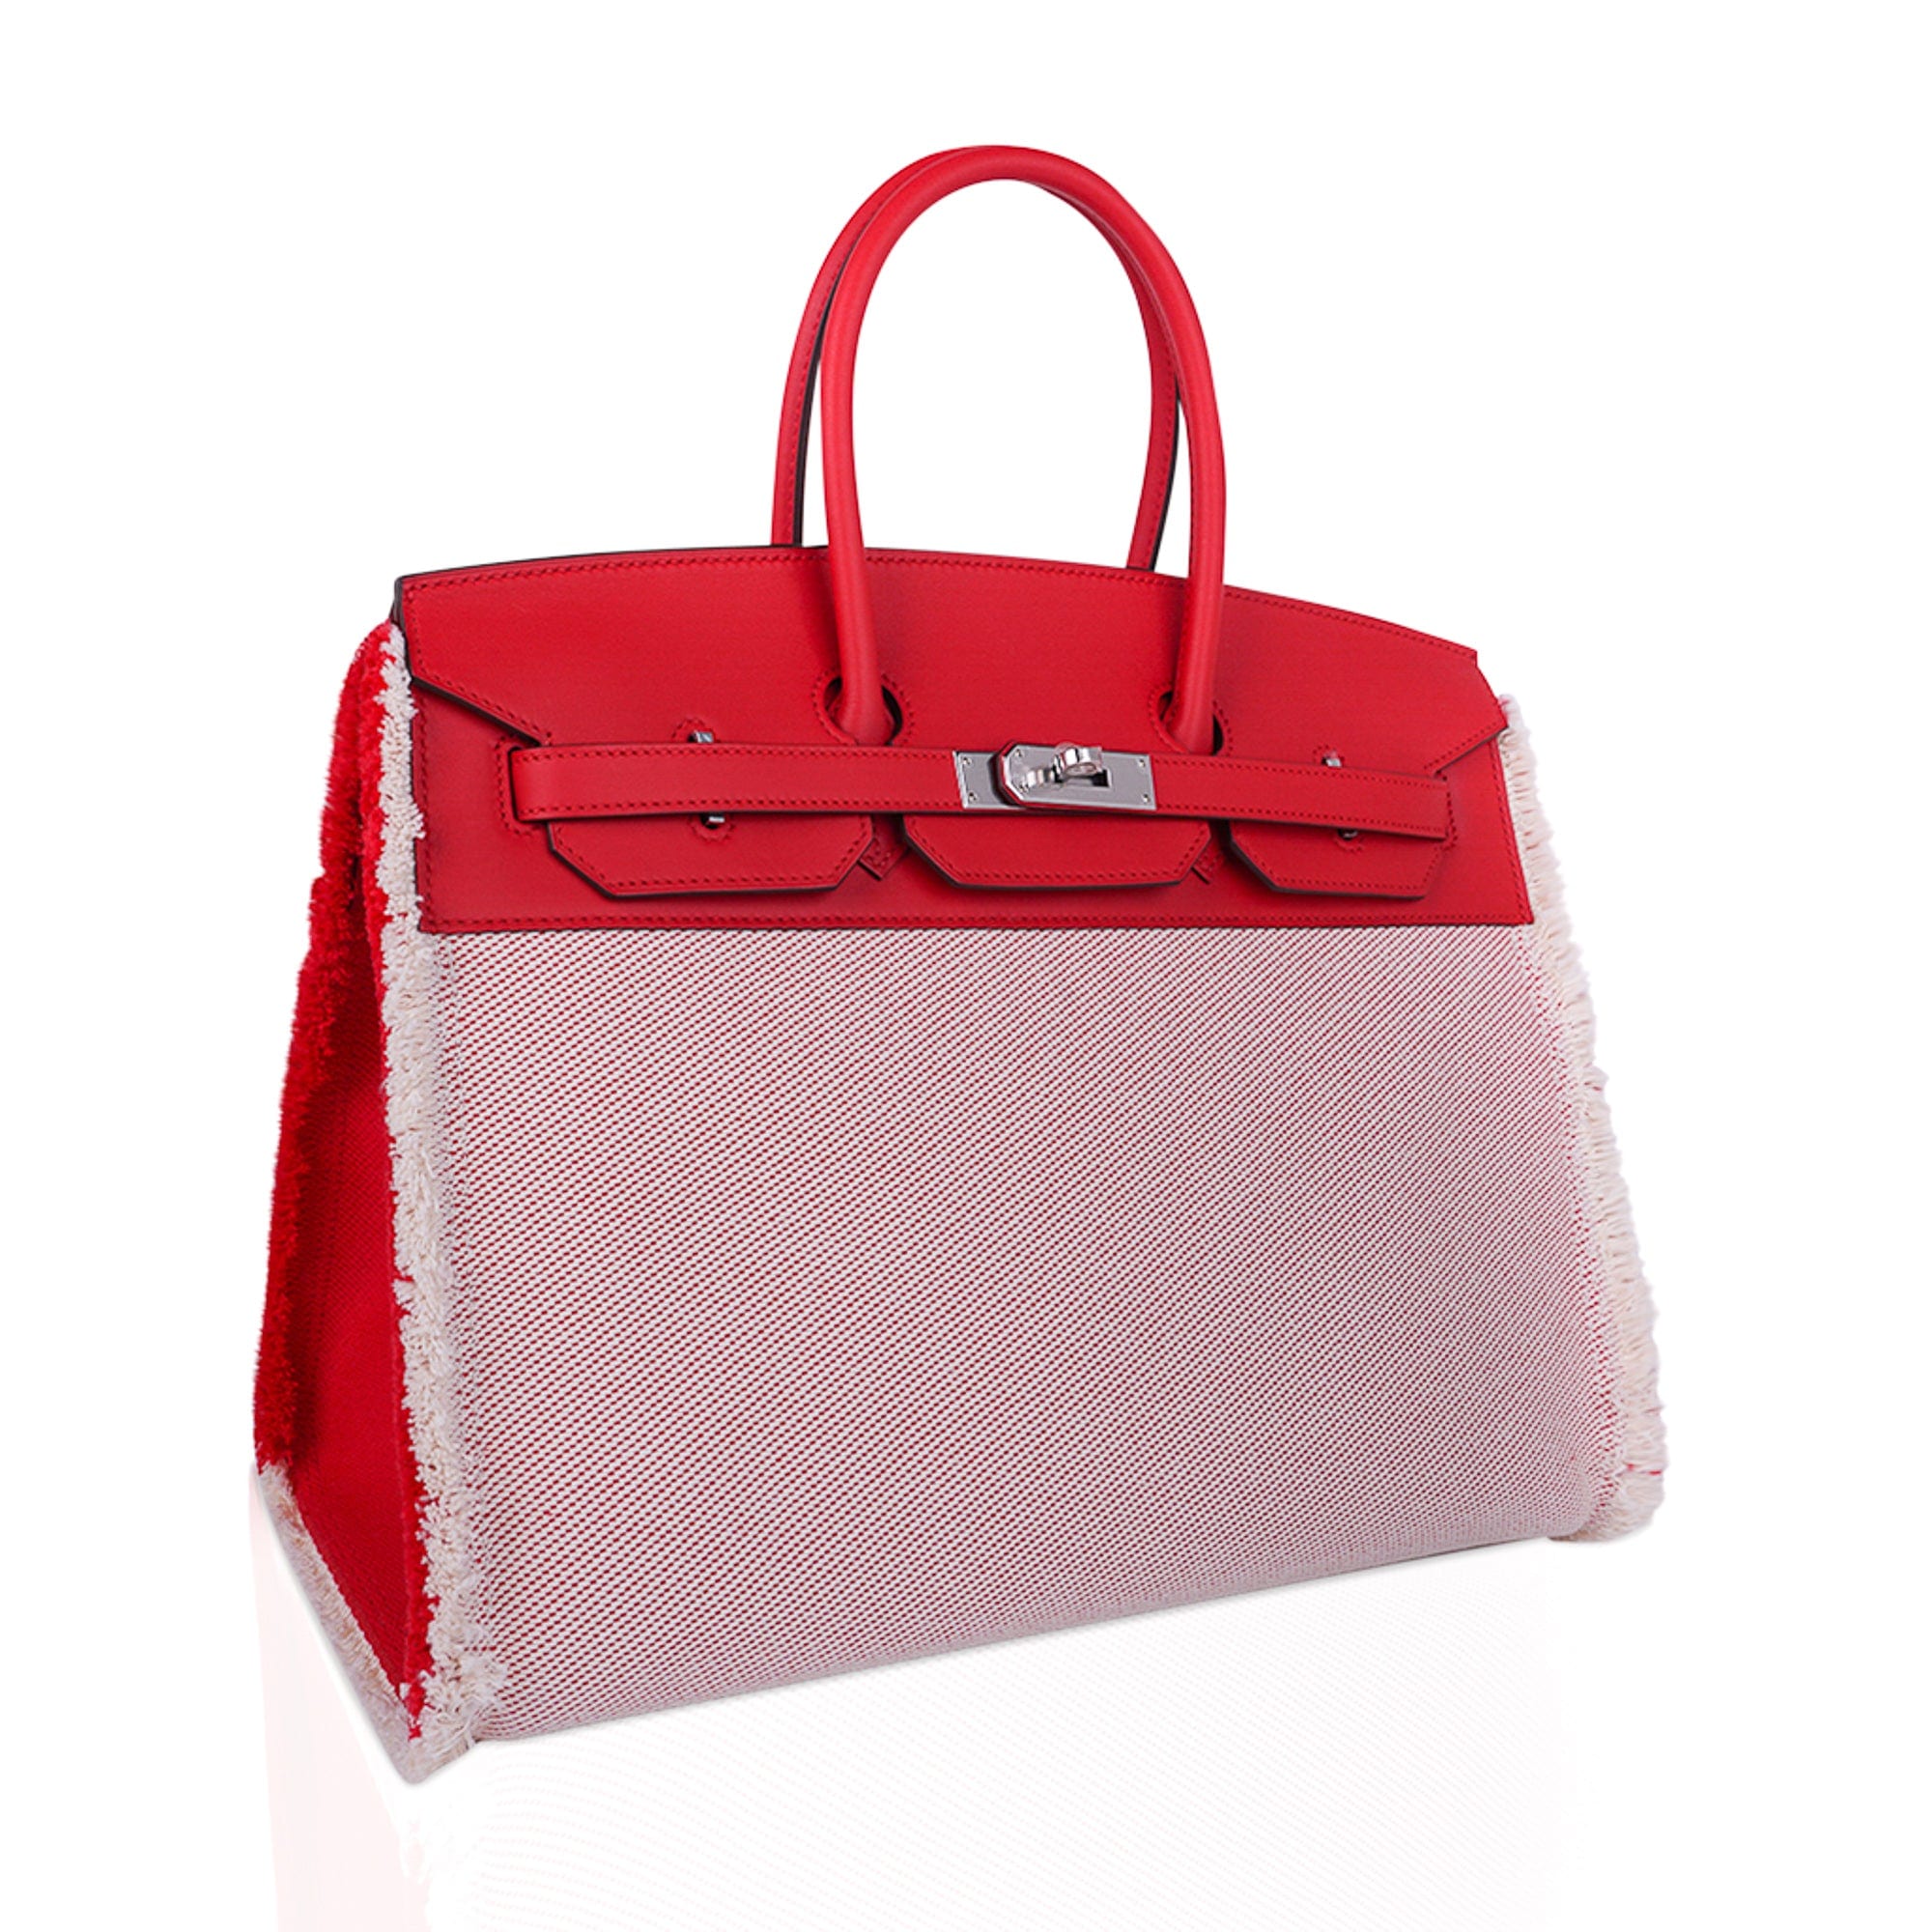 Hermes Birkin Fray Fray 35 Framboise Limited Edition Swift Leather Toile Bag